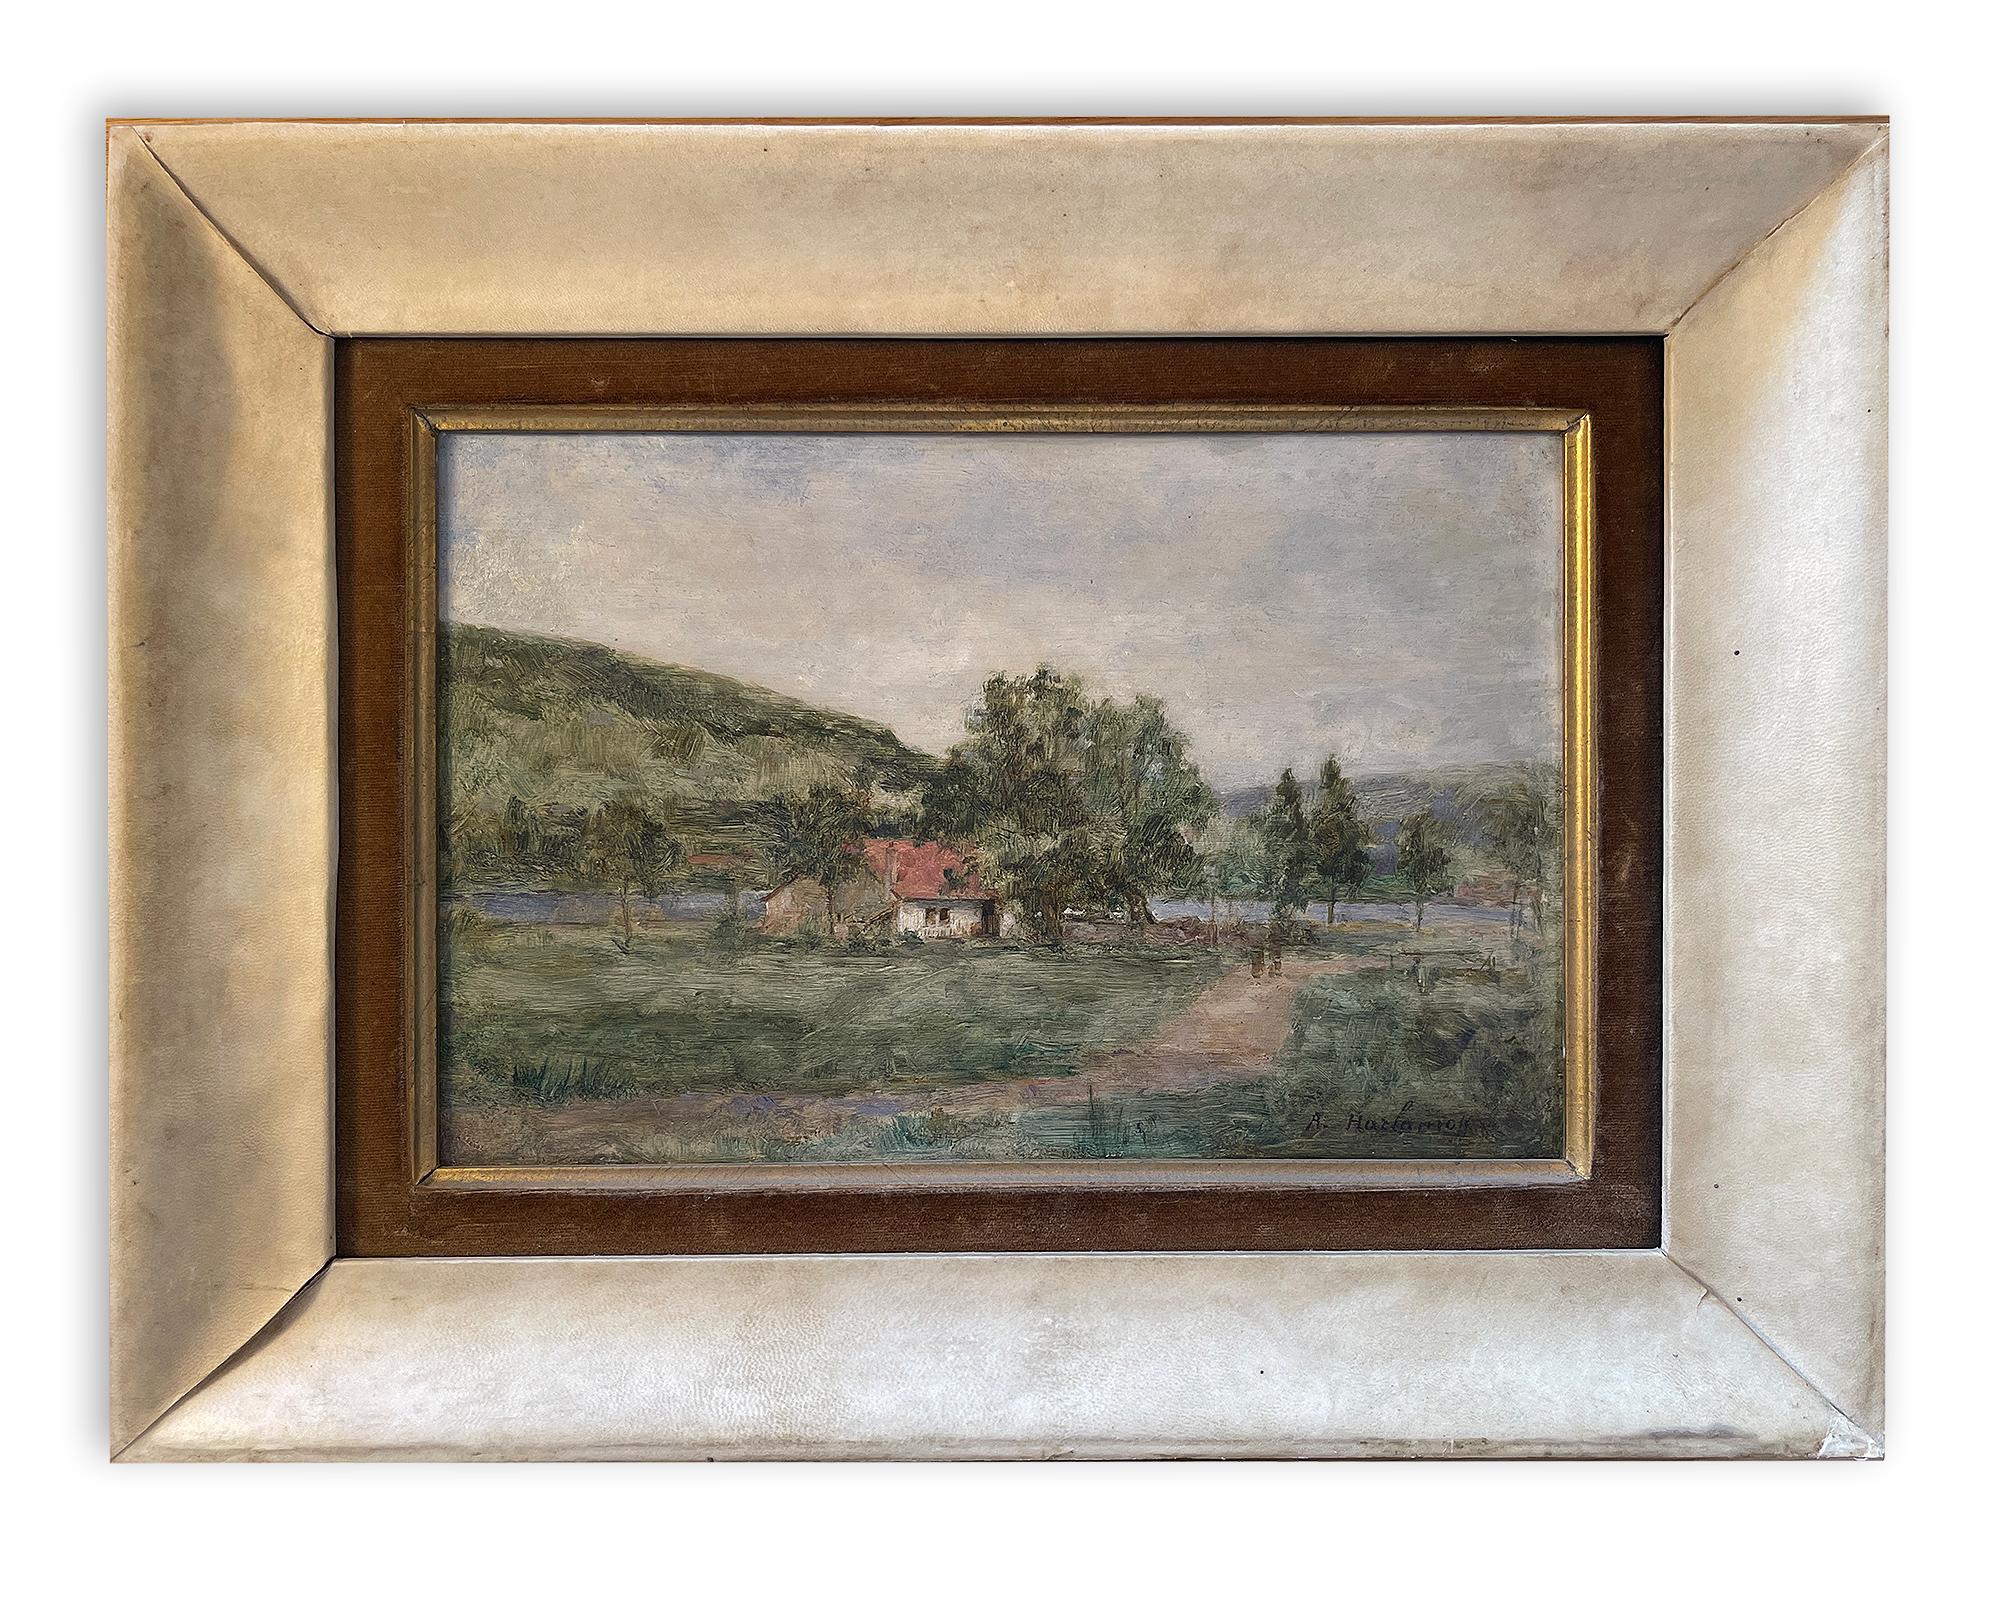 Alexei Alexeievich HARLAMOFF (1840-1925)

Alexei KARLAMOV, Aleksey Alekseevich KHARLAMOV
Russian School
Pair of oil on board depicting landscapes.
Frames in wood and parchment

1 -Red-roofed house nestled among lush trees bordering a river,
Oil on